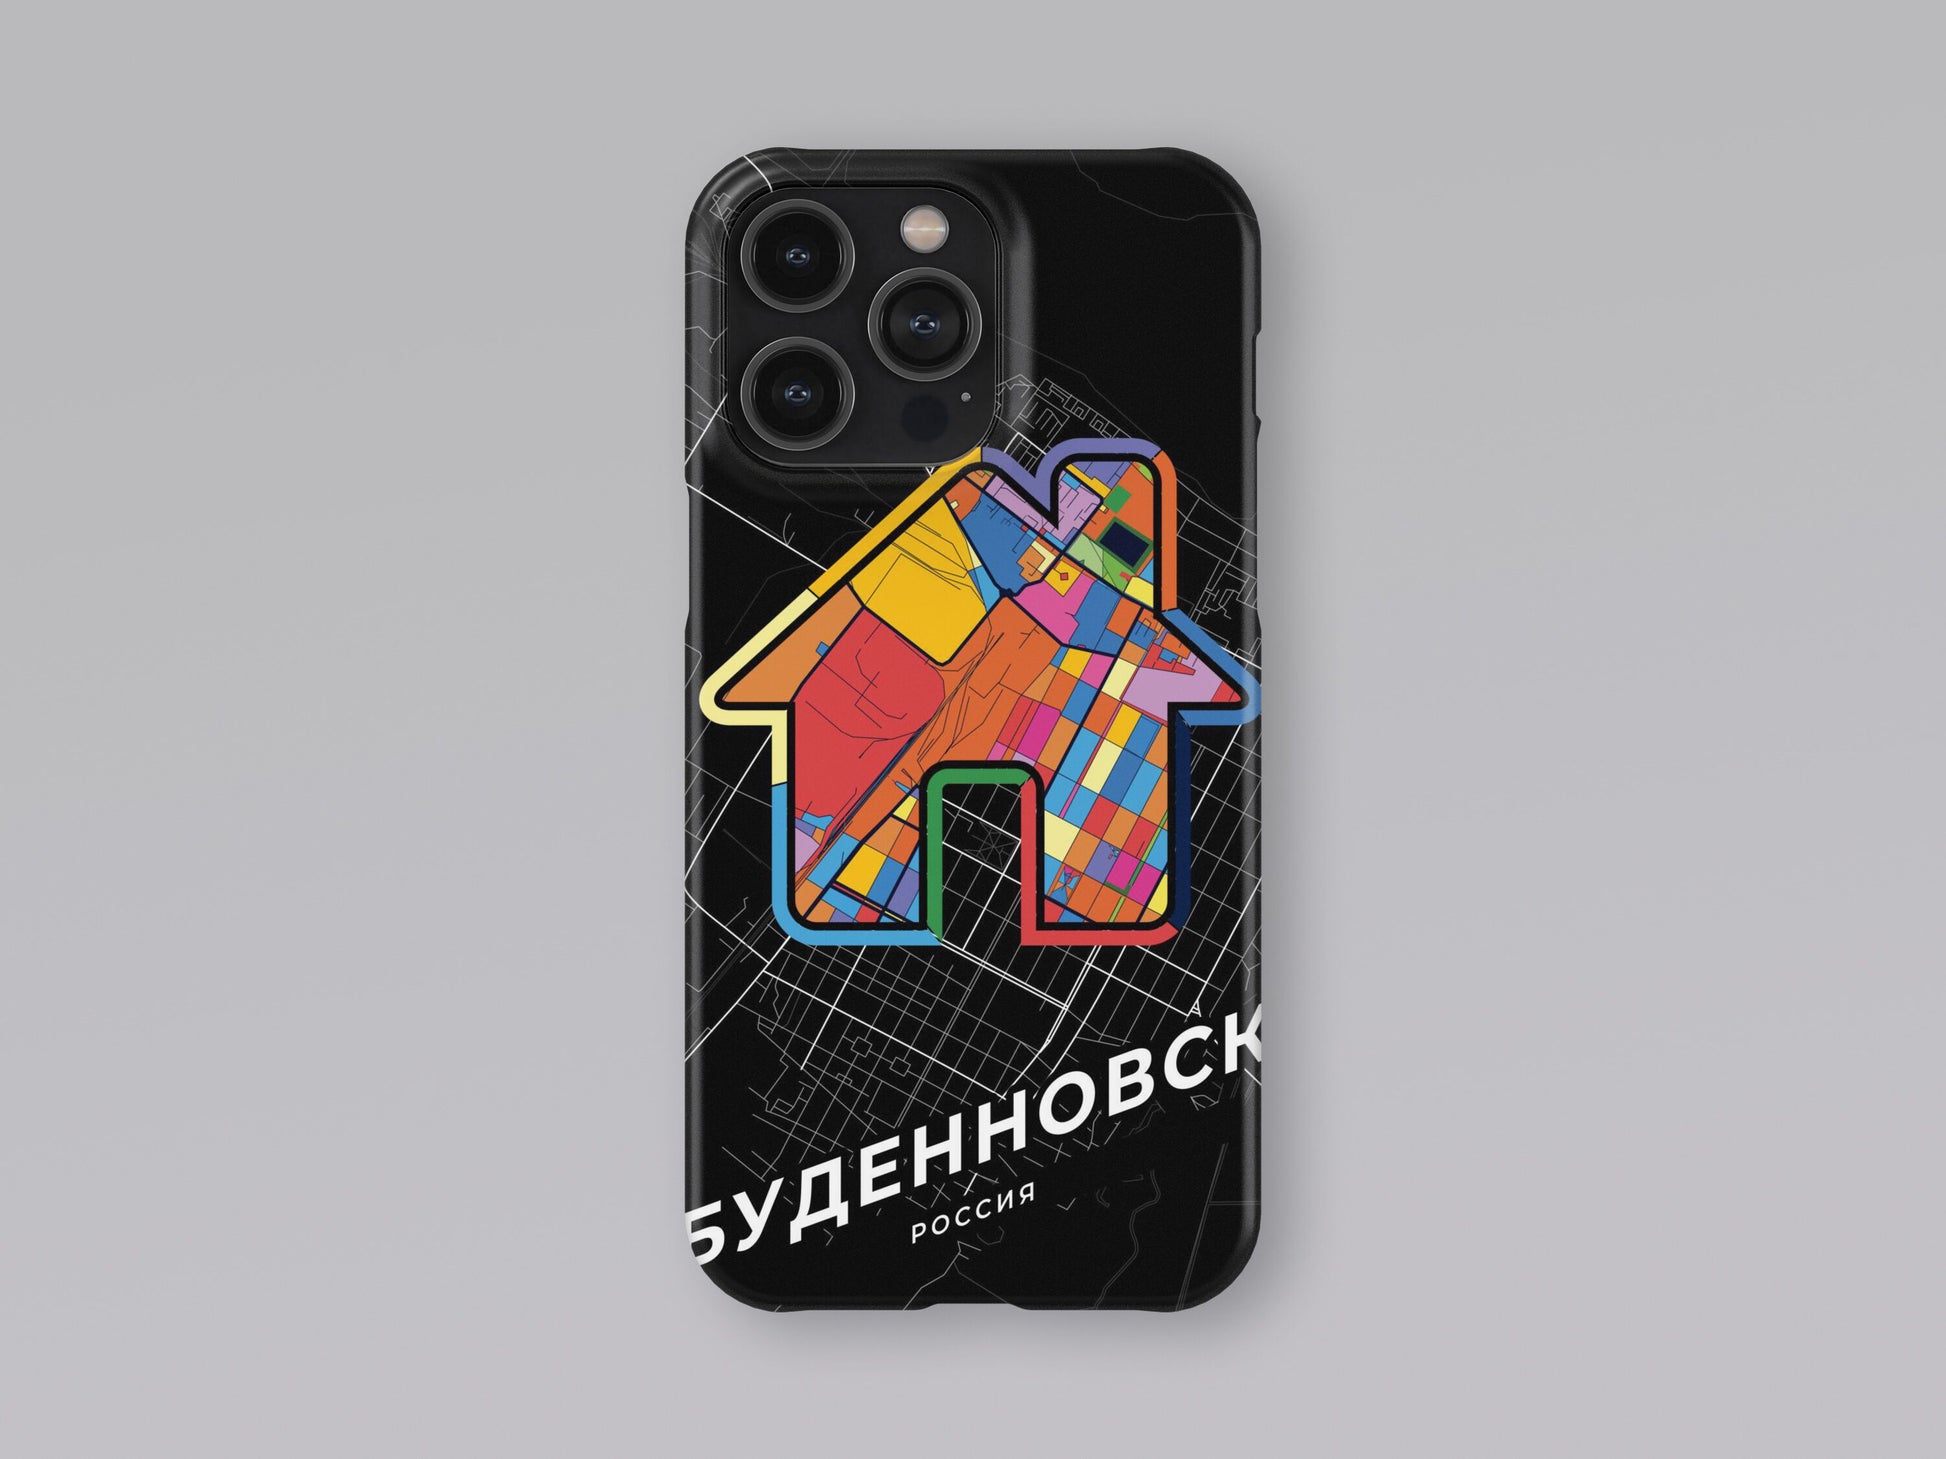 Budyonnovsk Russia slim phone case with colorful icon. Birthday, wedding or housewarming gift. Couple match cases. 3